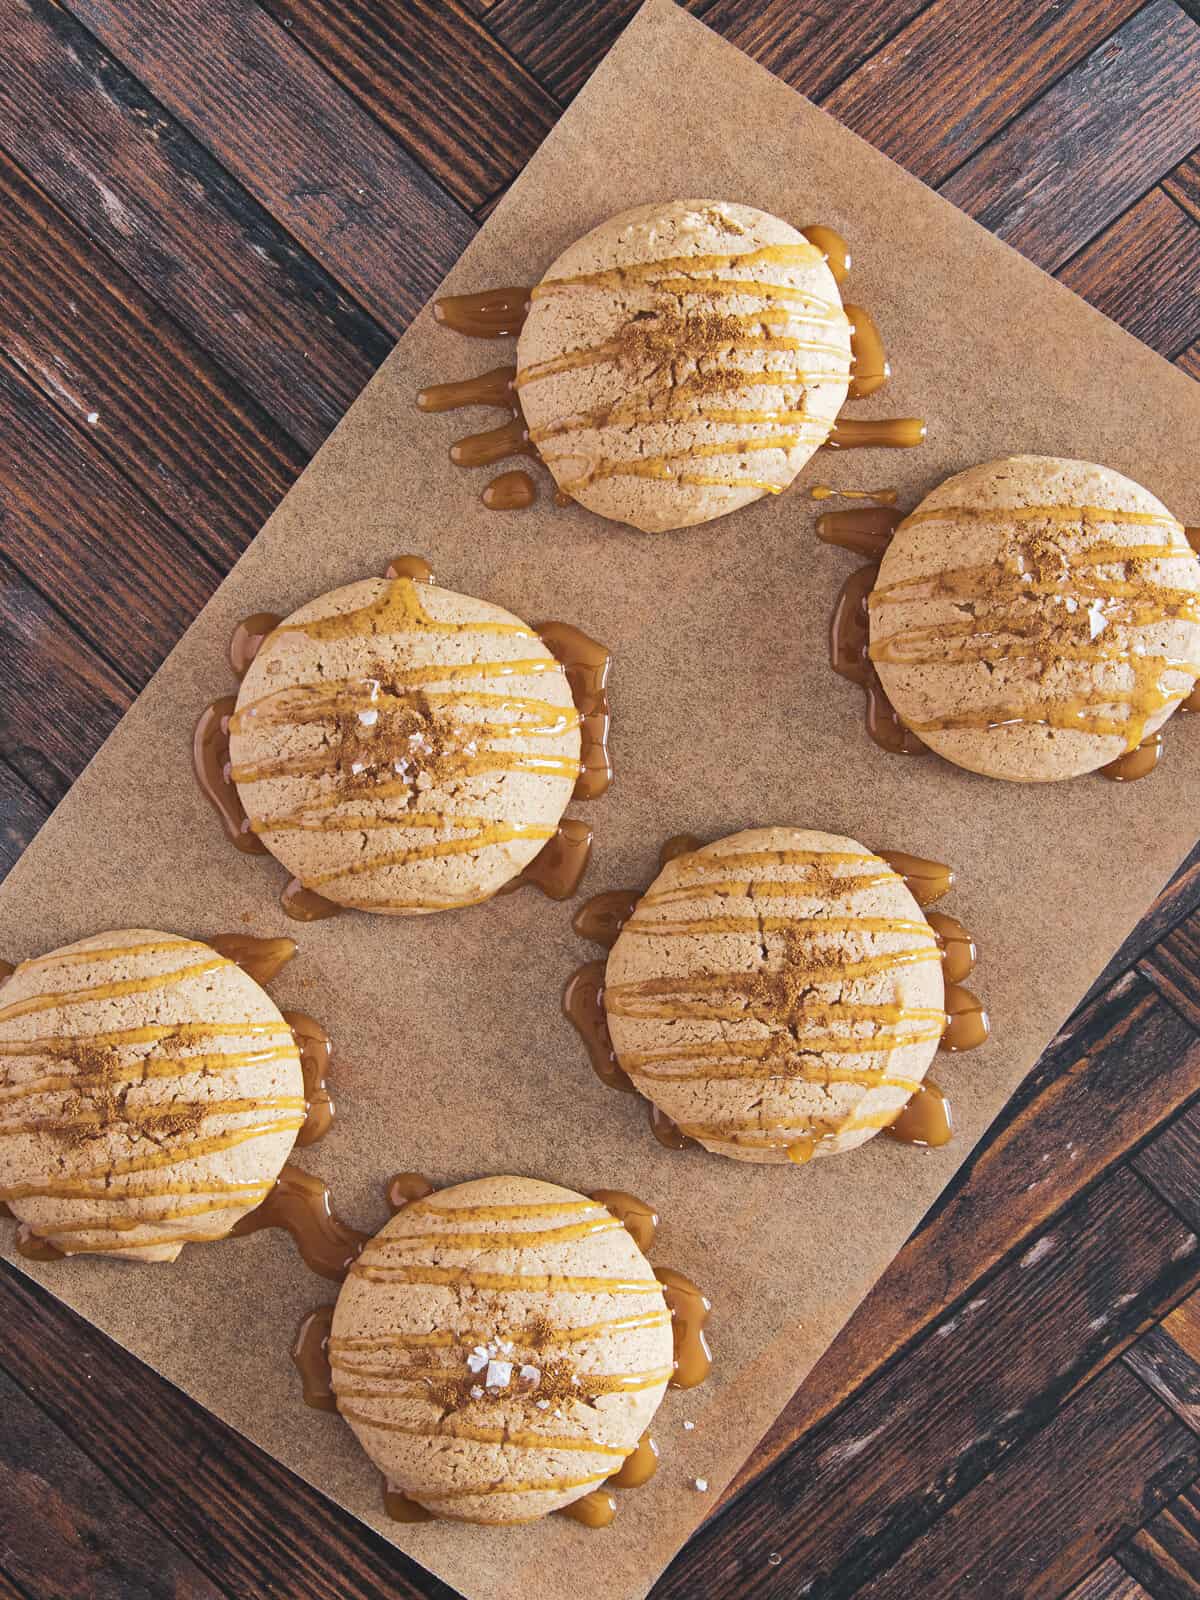 Fresh baked and decorated with caramel and flaky salt apple cider cookies.